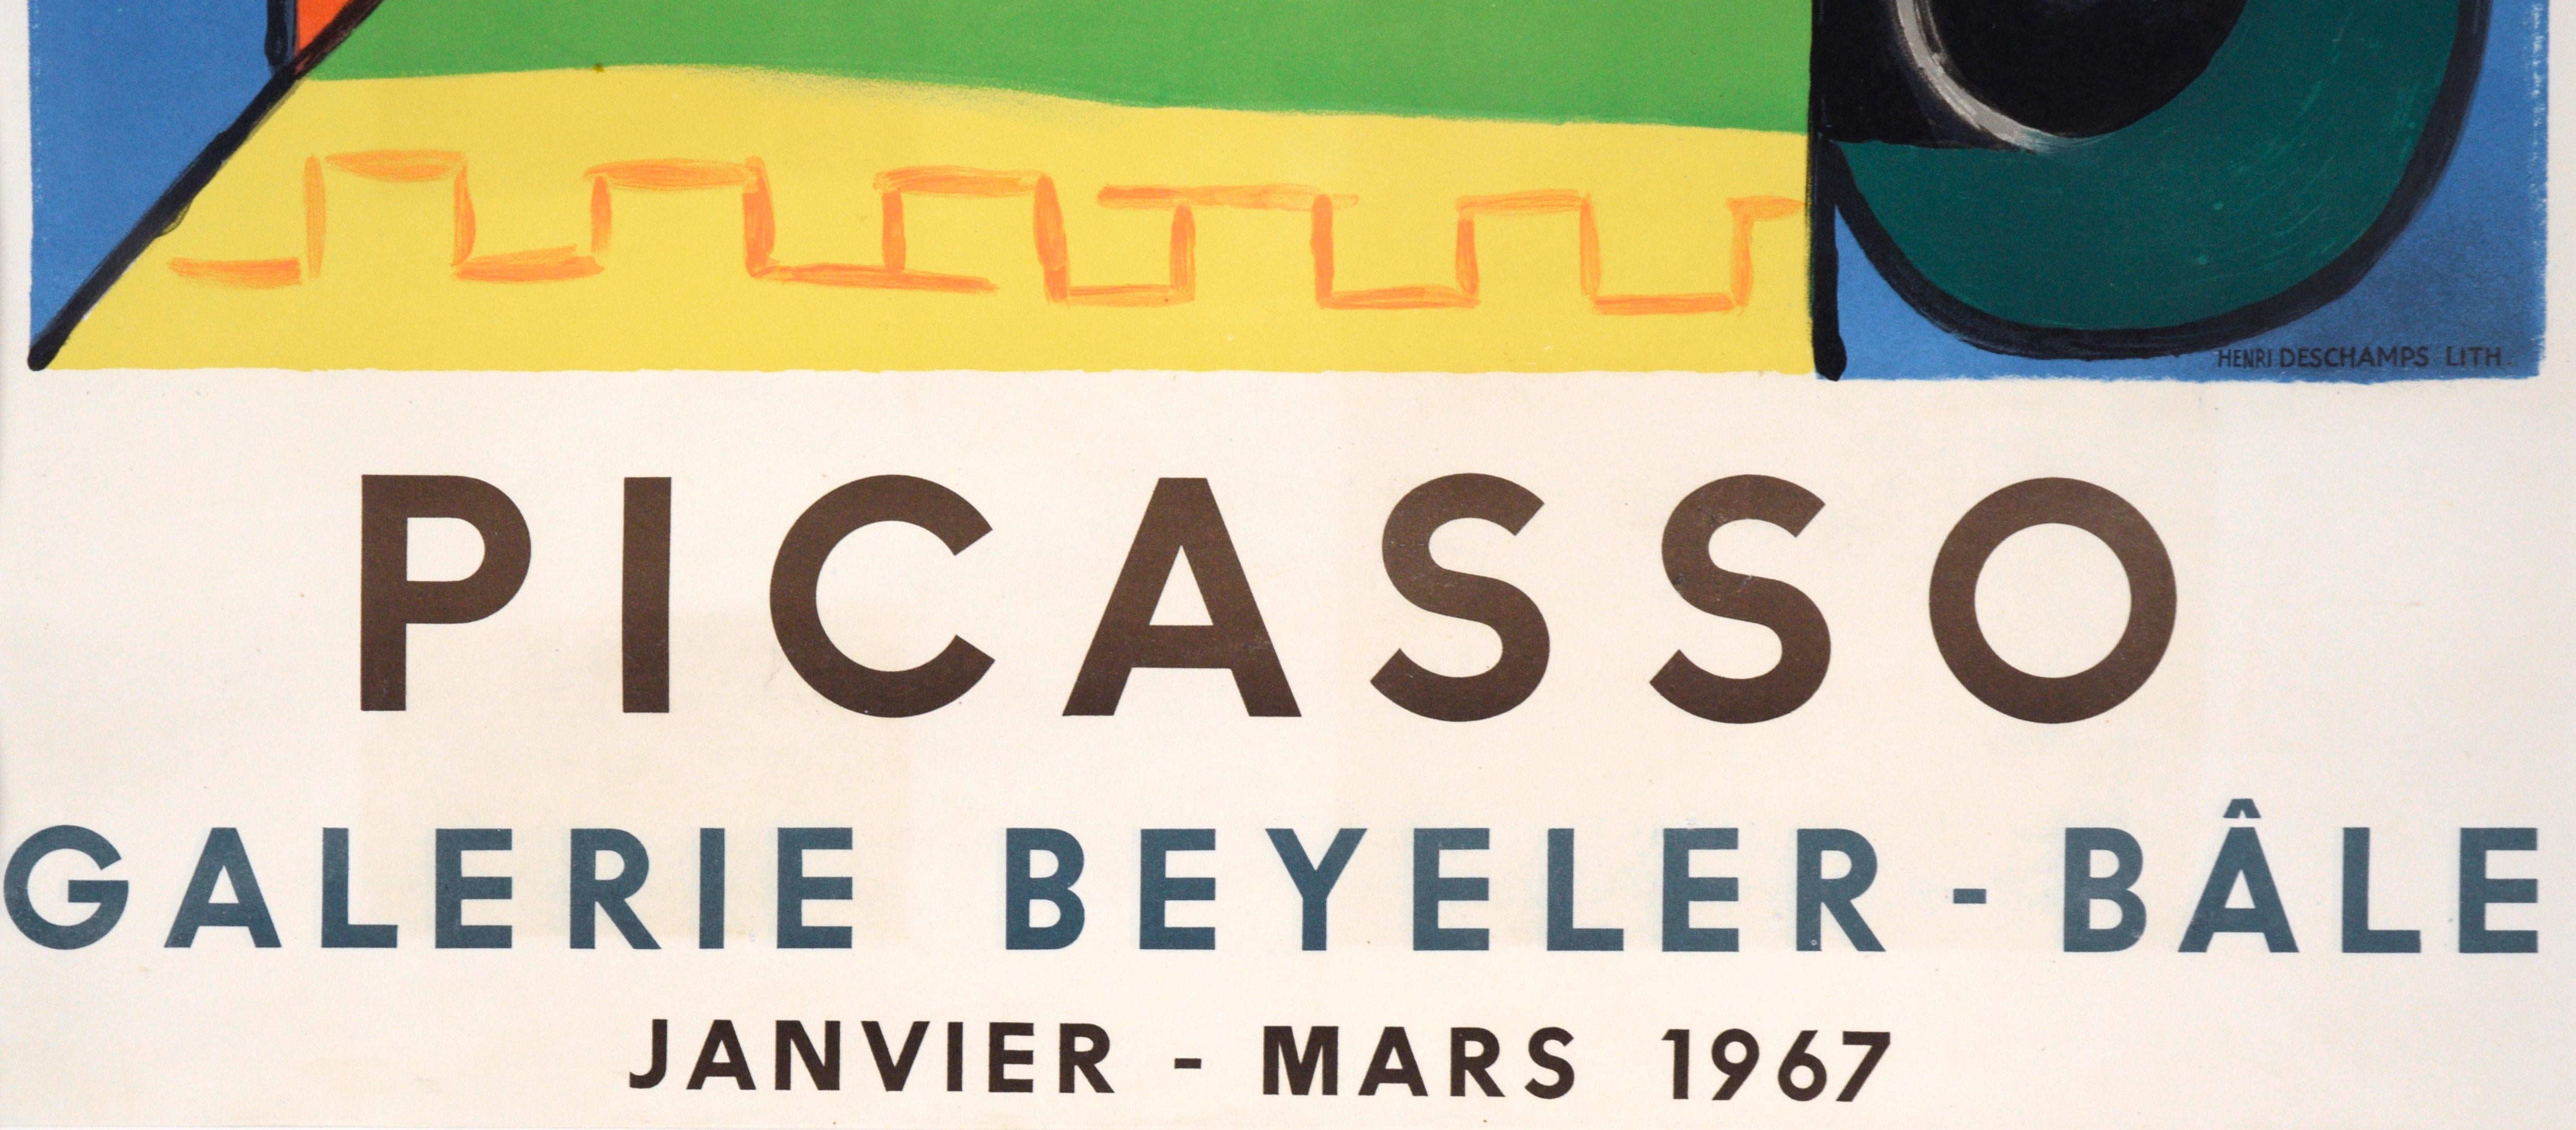 Poster for 1967 Exhibition at Galerie Beyeler - Bale by Atelier Mourlot 3